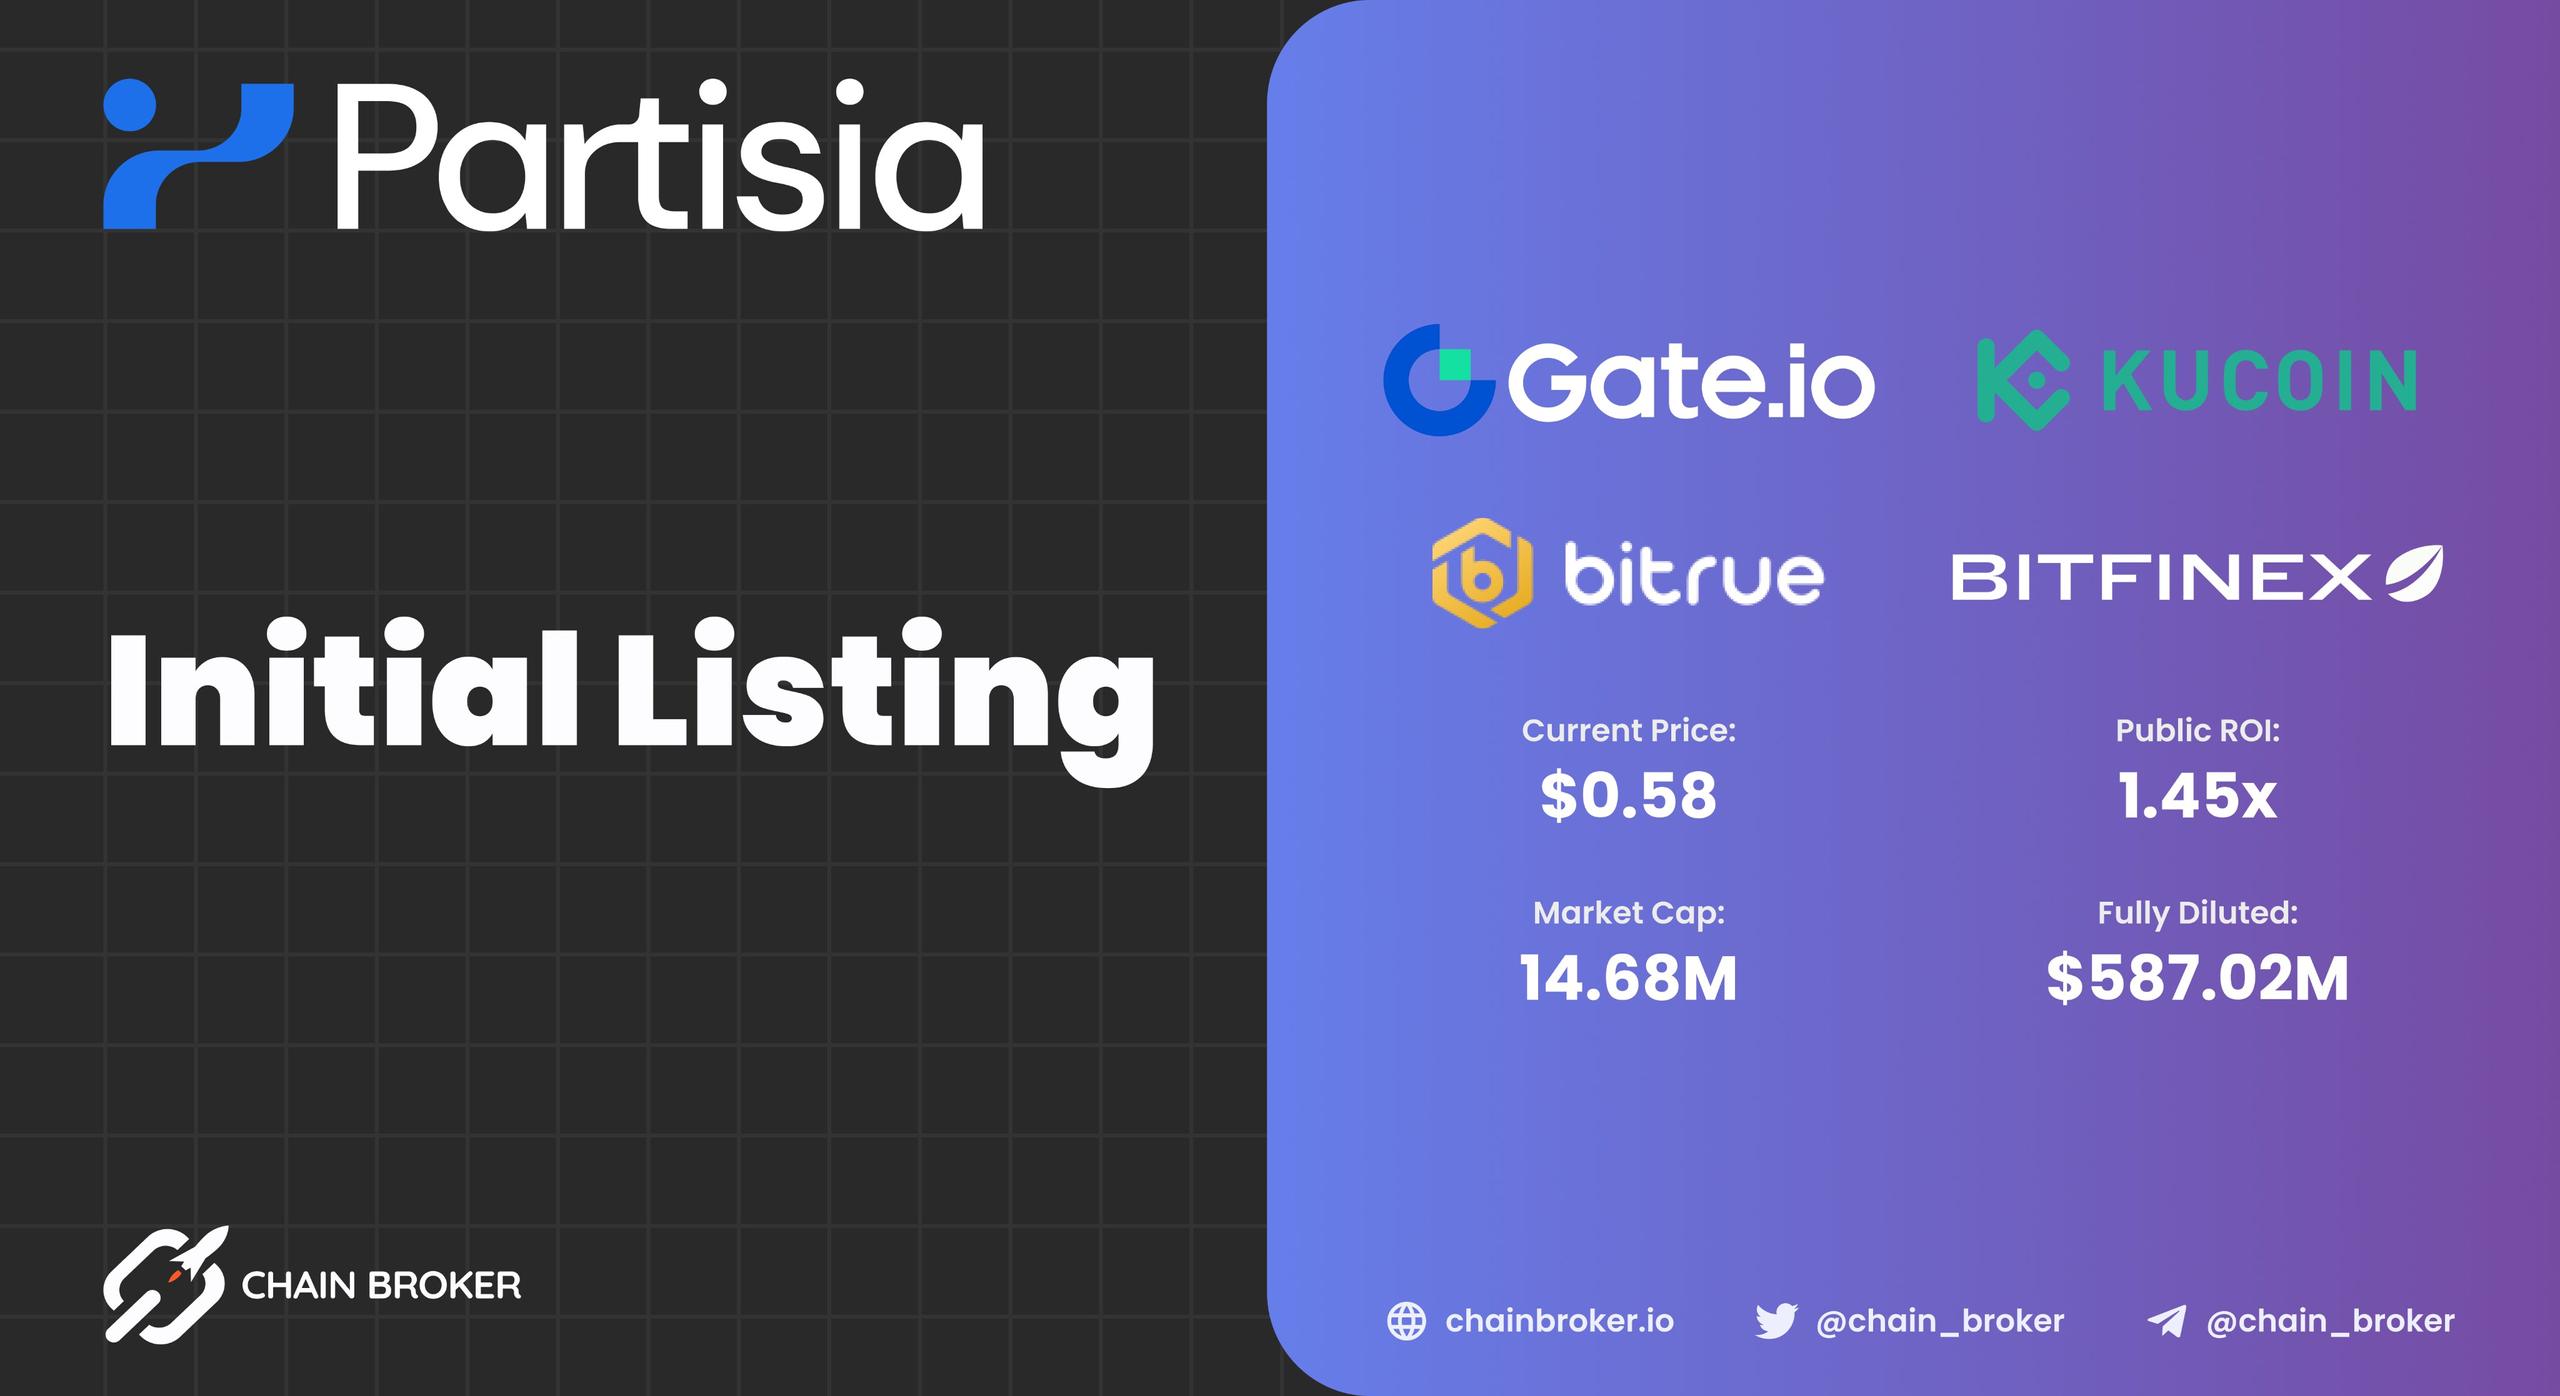 Partisia Blockchain has been Listed